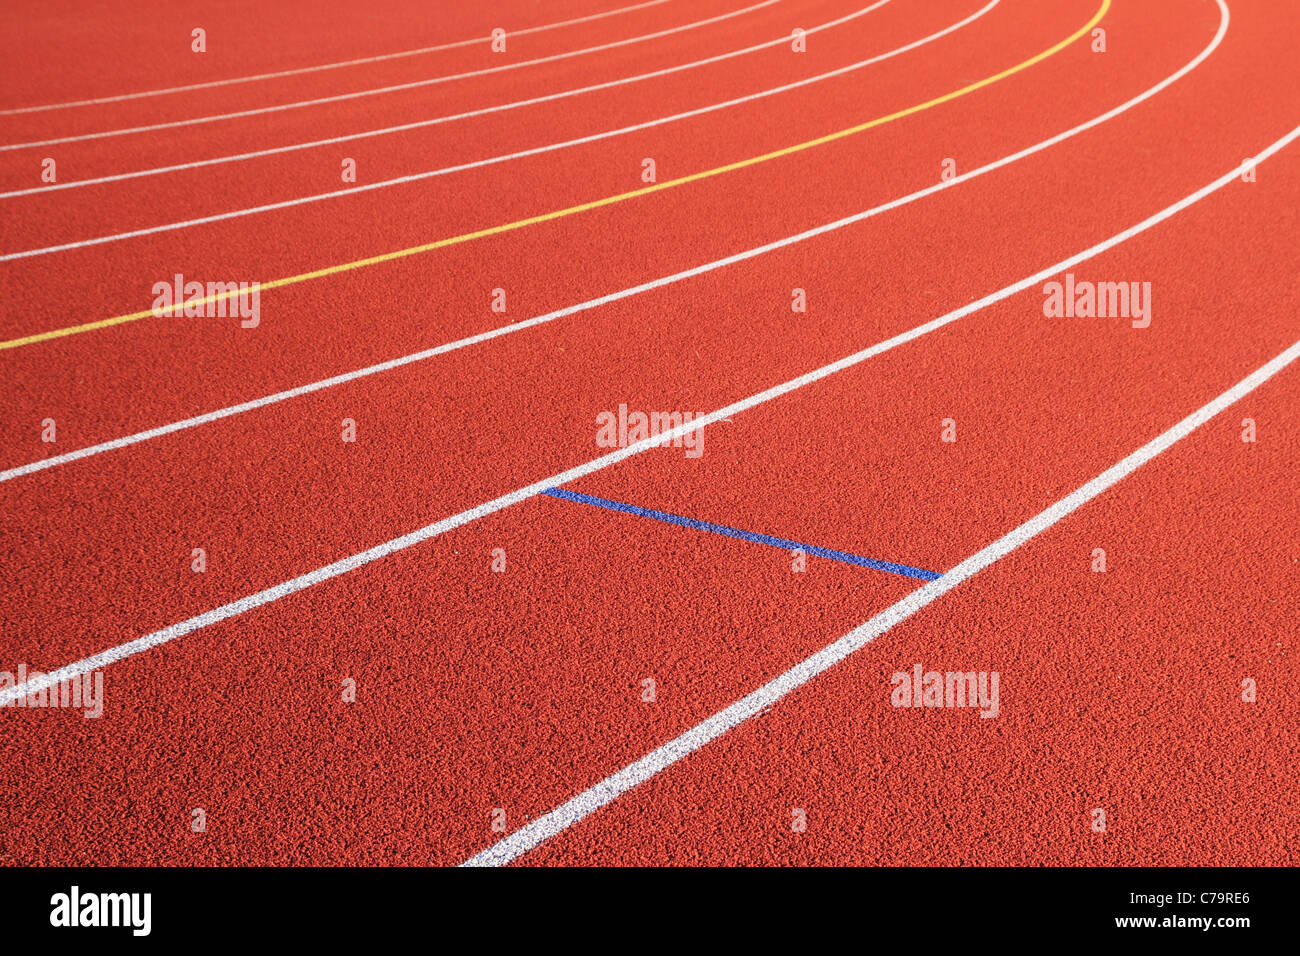 track lanes diagonal and turn to the left on a red rubber track Stock Photo